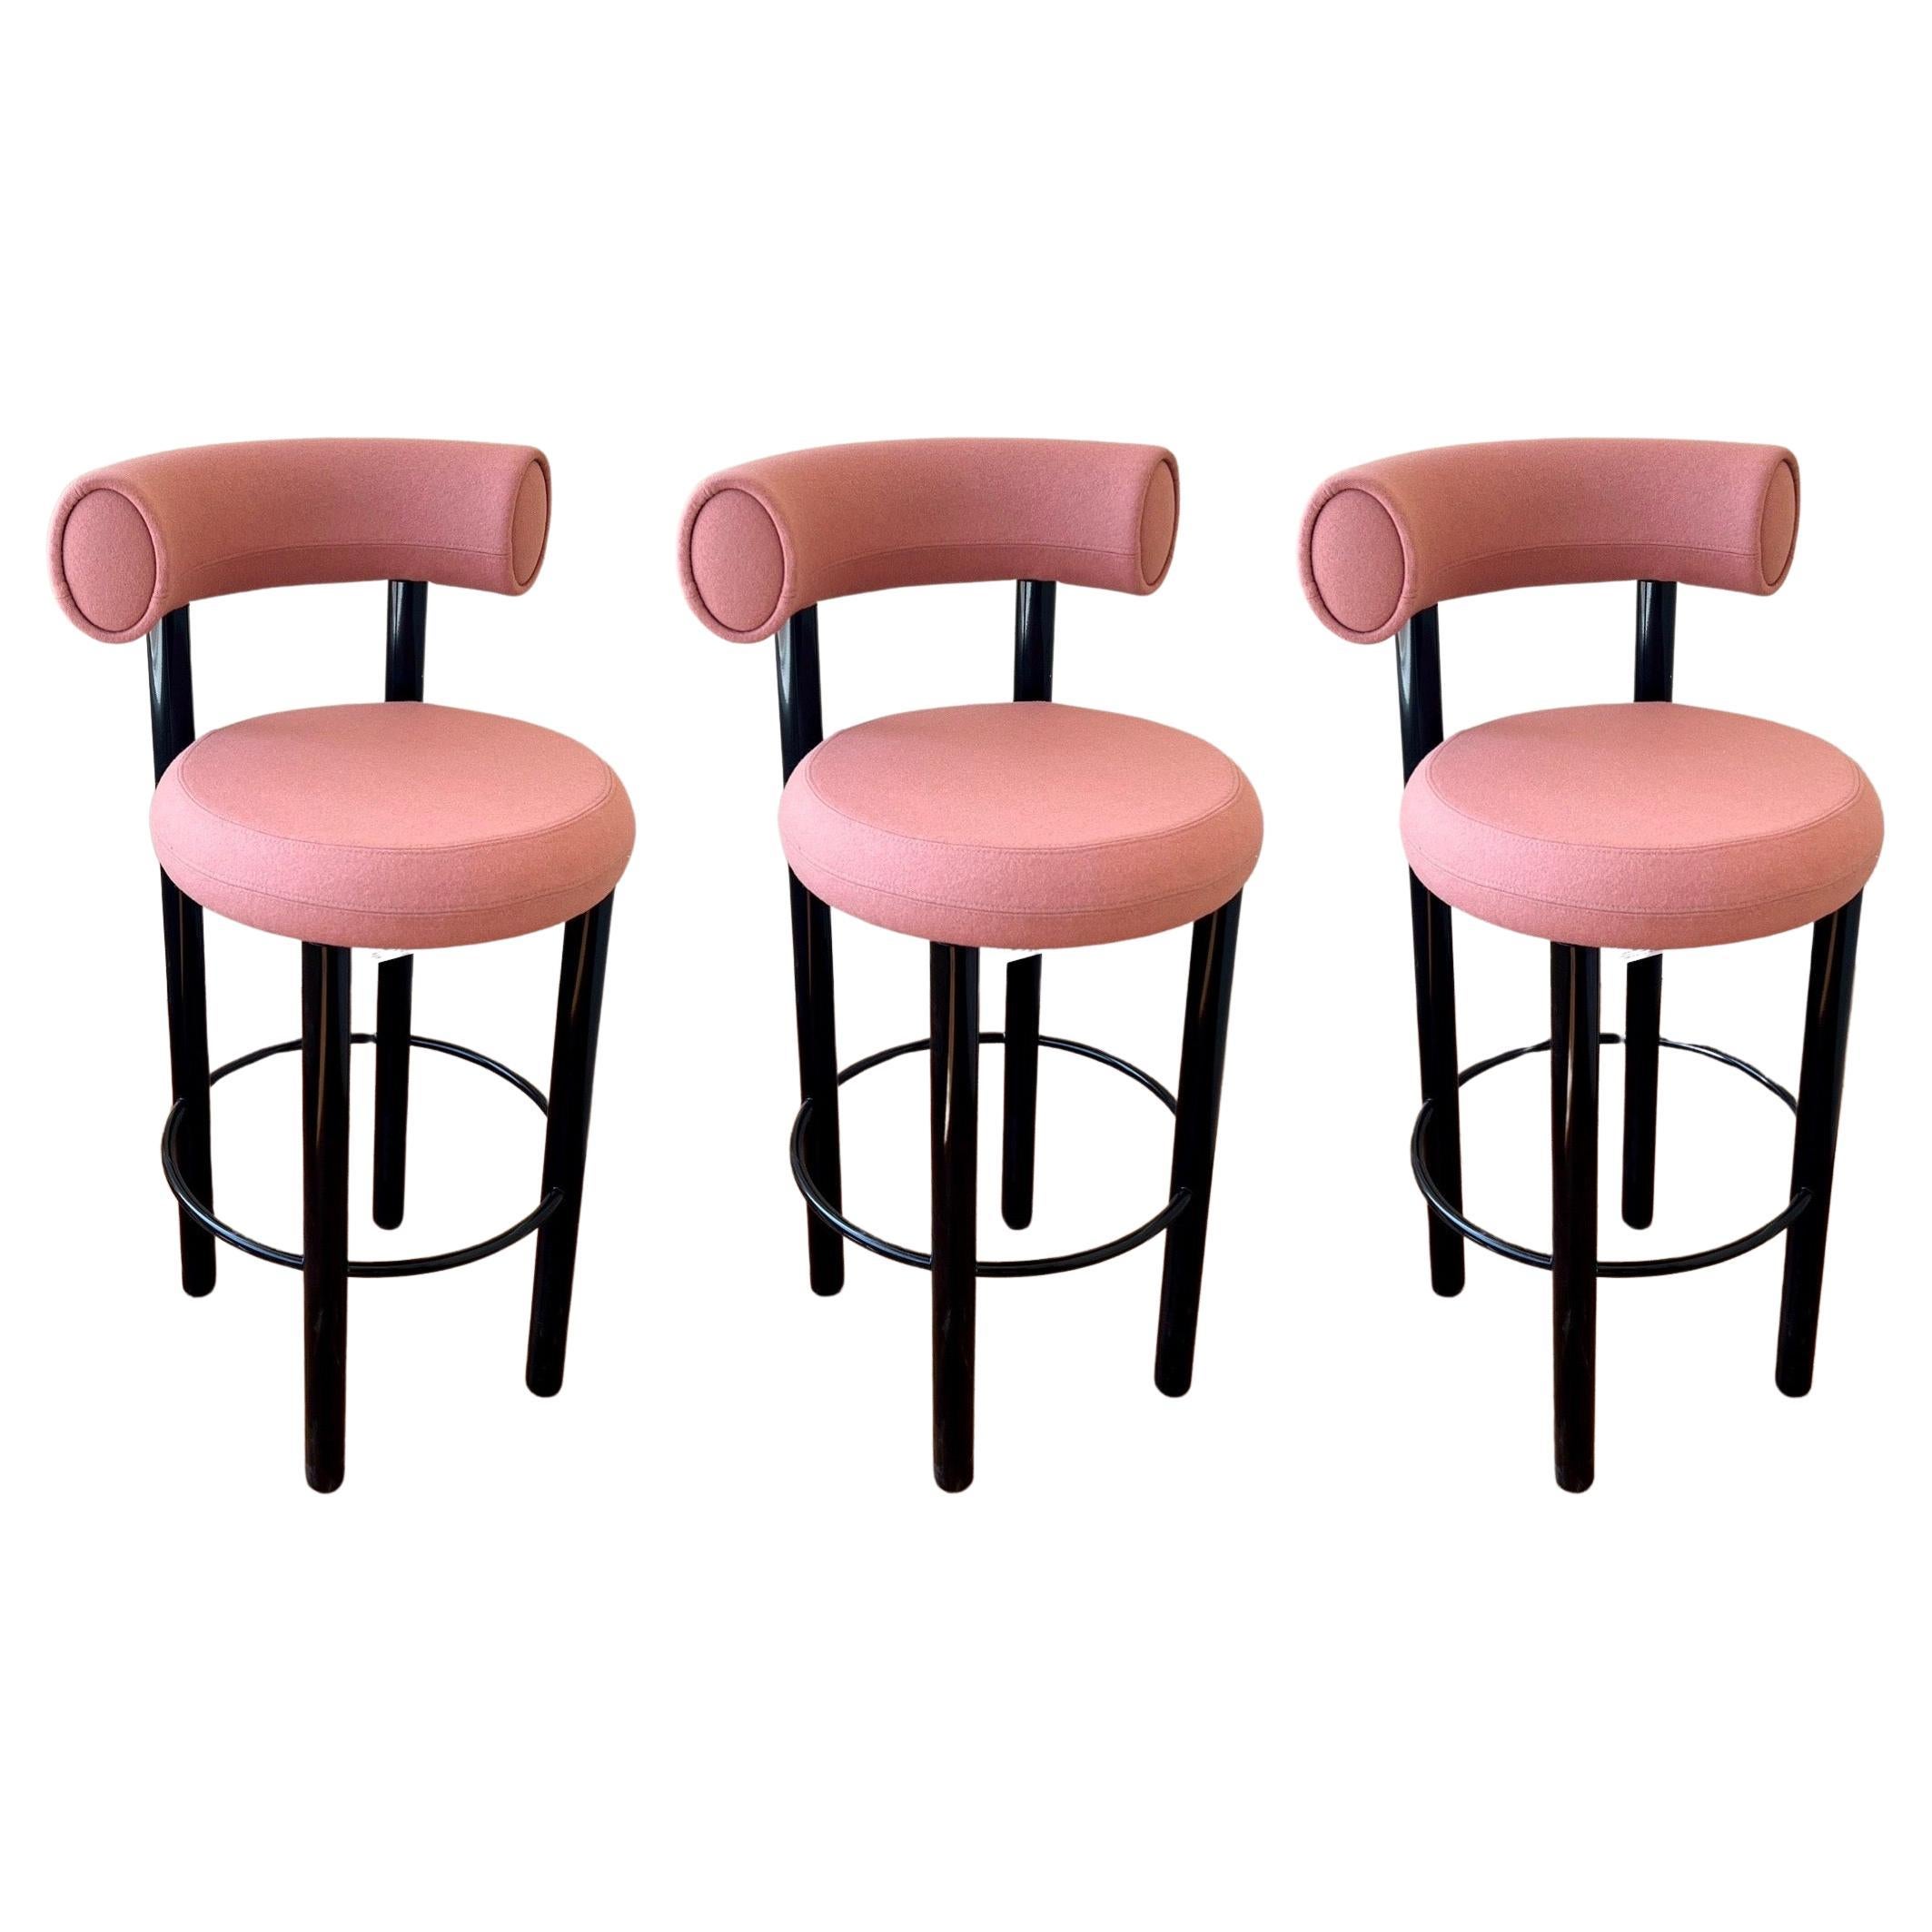 pair of Barstools these were custom made we have another set of 3 available, but we were not able to use these sets we had to wait 6 months for them our loss is your win. these are new metal frames in a black enameled finish with pink upholstery